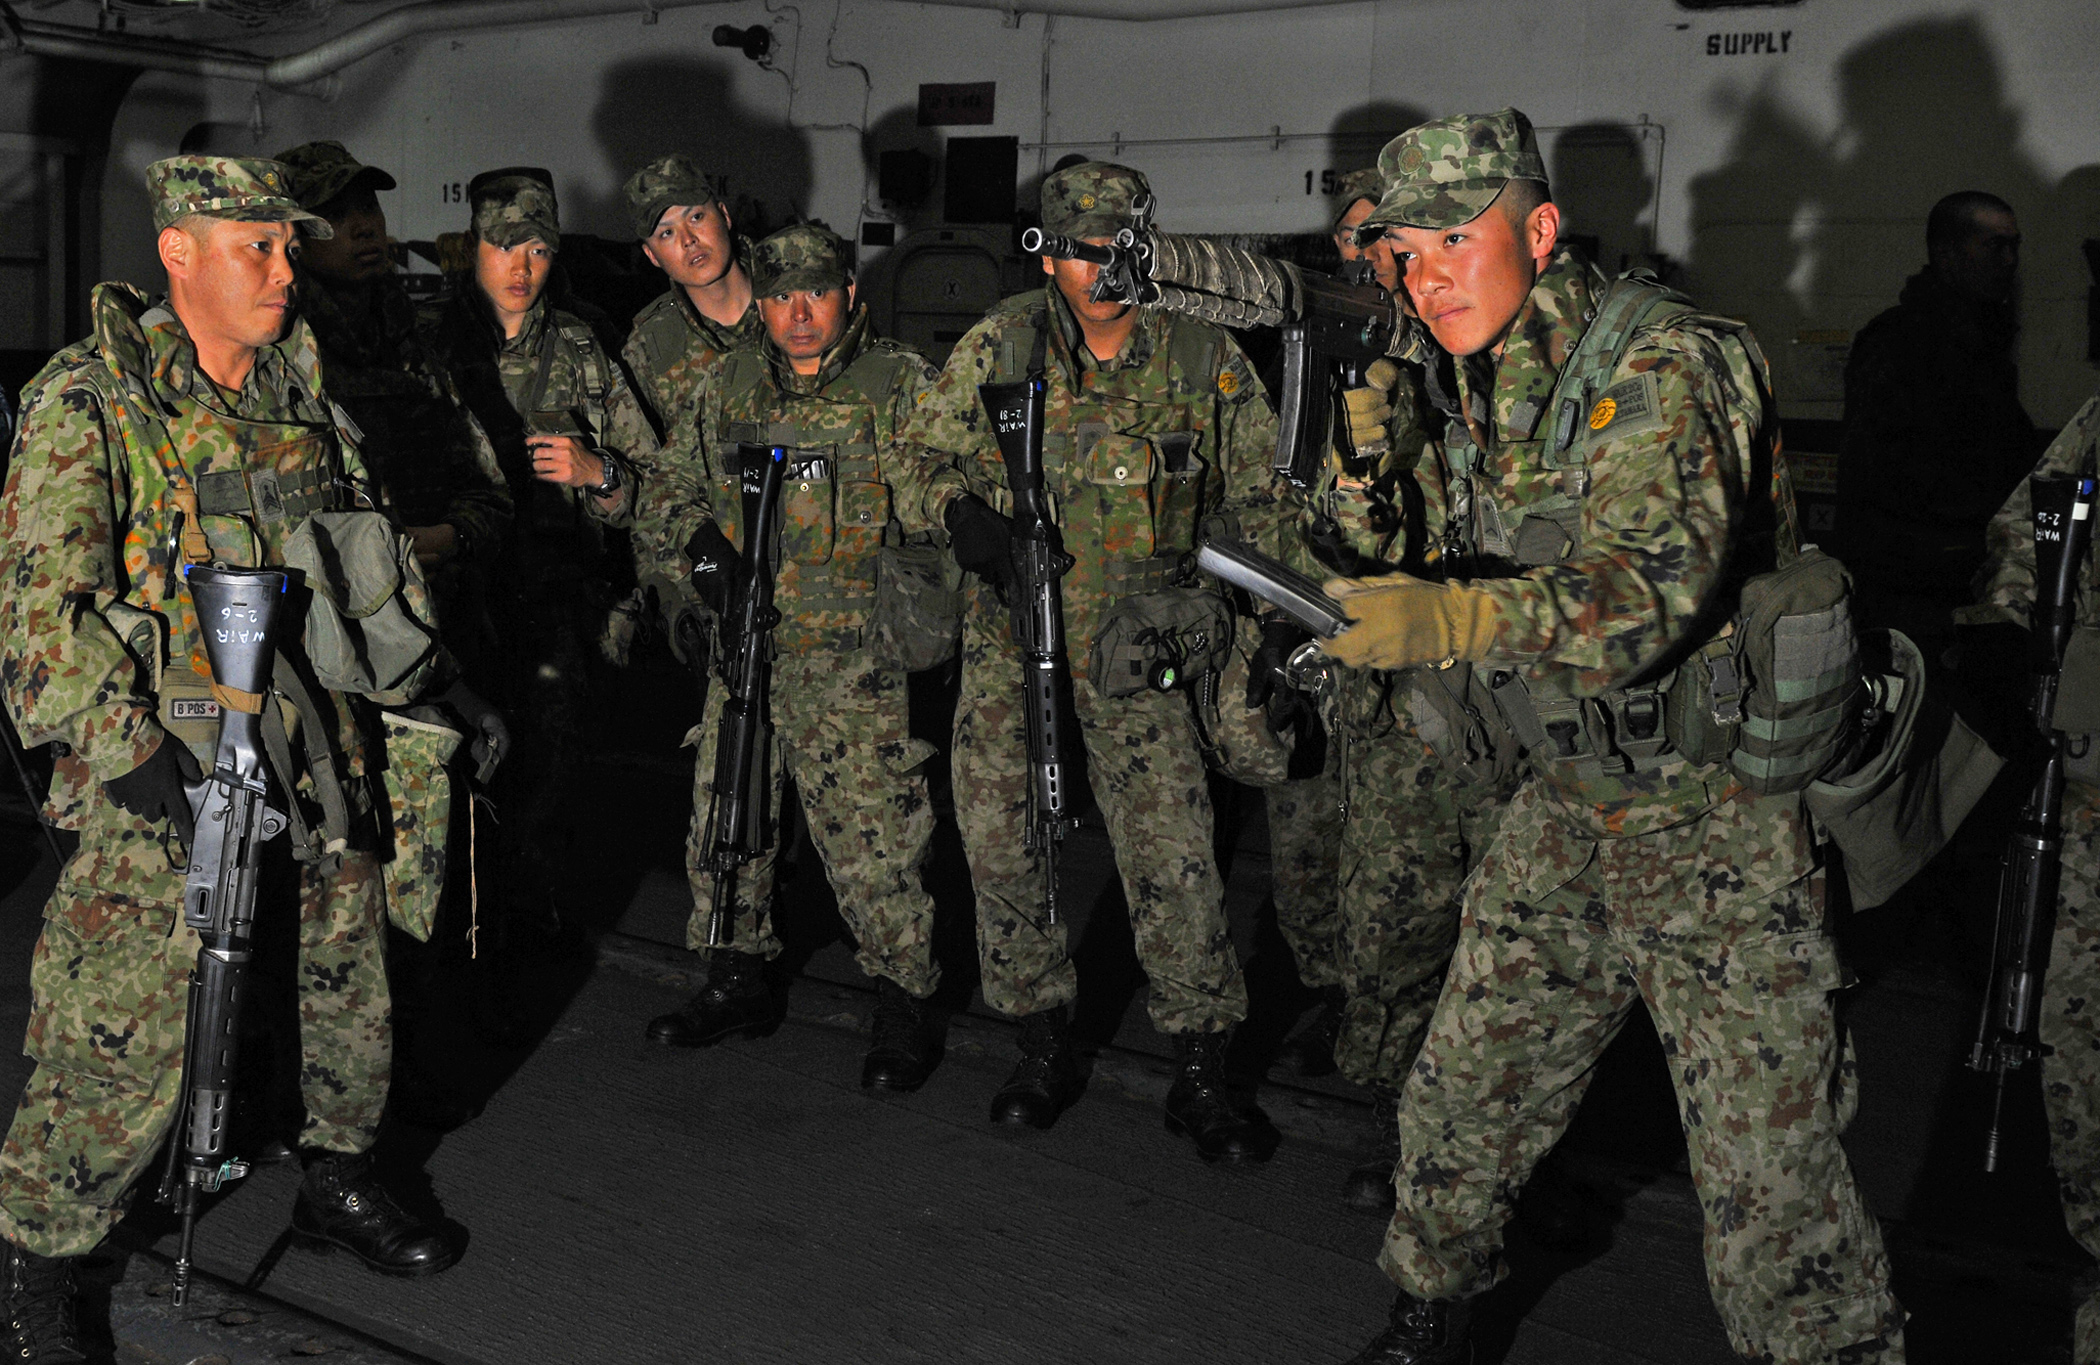 US_Navy_120208-N-KB563-051_Members_of_the_Japan_Ground_Self-Defense_Force_conduct_small_arms_weapons_training_aboard_the_amphibious_assault_ship_US.jpg